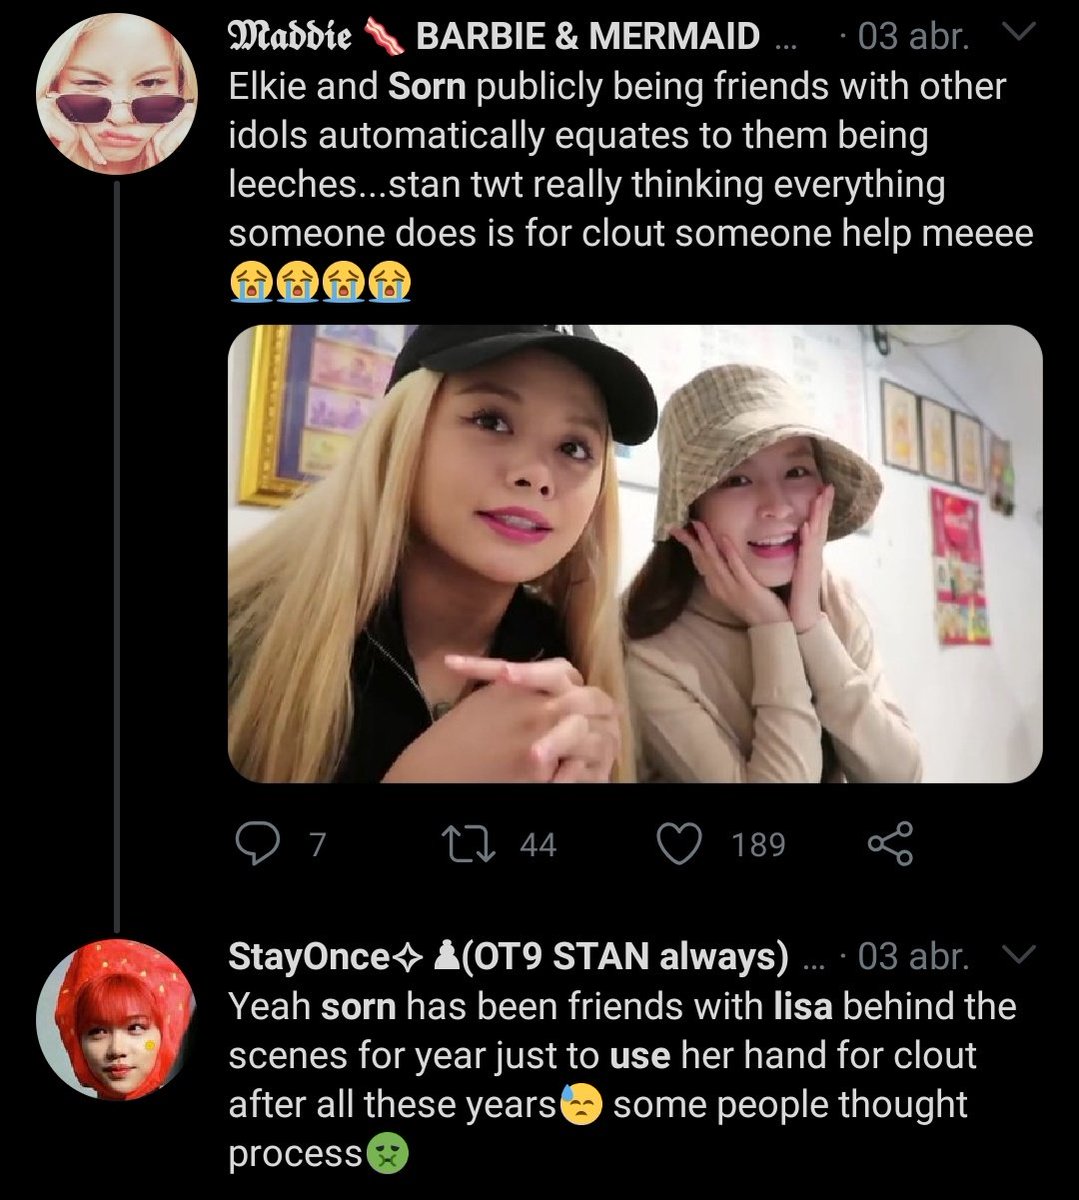 making fun of s0rn or saying she's broke or using their friendship 'to get clout' when she's been friends with them since 14y.o and been always a supportive friend + sorn whole thai family are rich